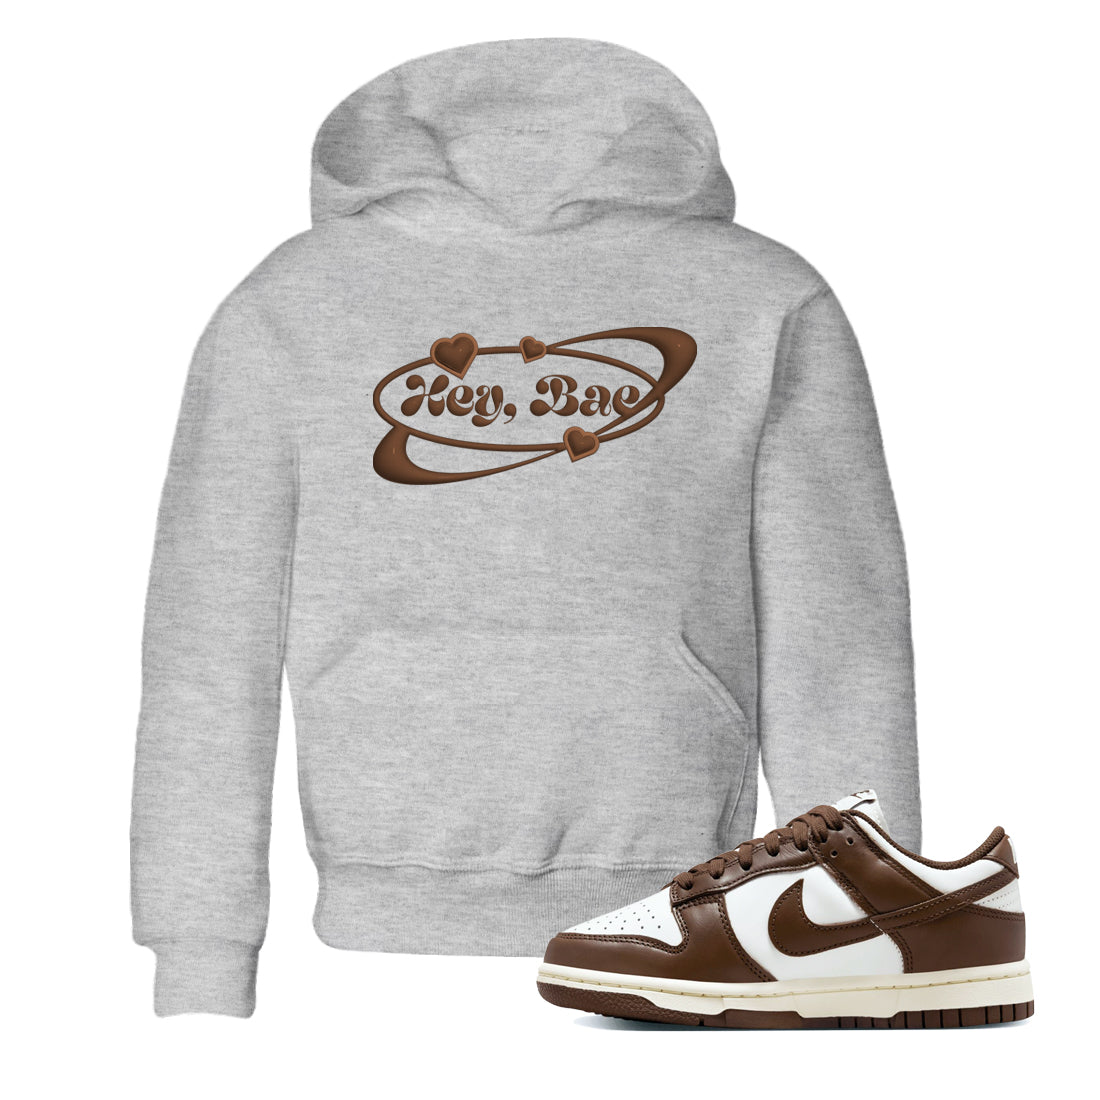 Dunk Cacao Wow shirt to match jordans Hey Bae sneaker tees Nike Dunk Cacao Wow SNRT Sneaker Release Tees Baby Toddler Heather Grey 1 T-Shirt